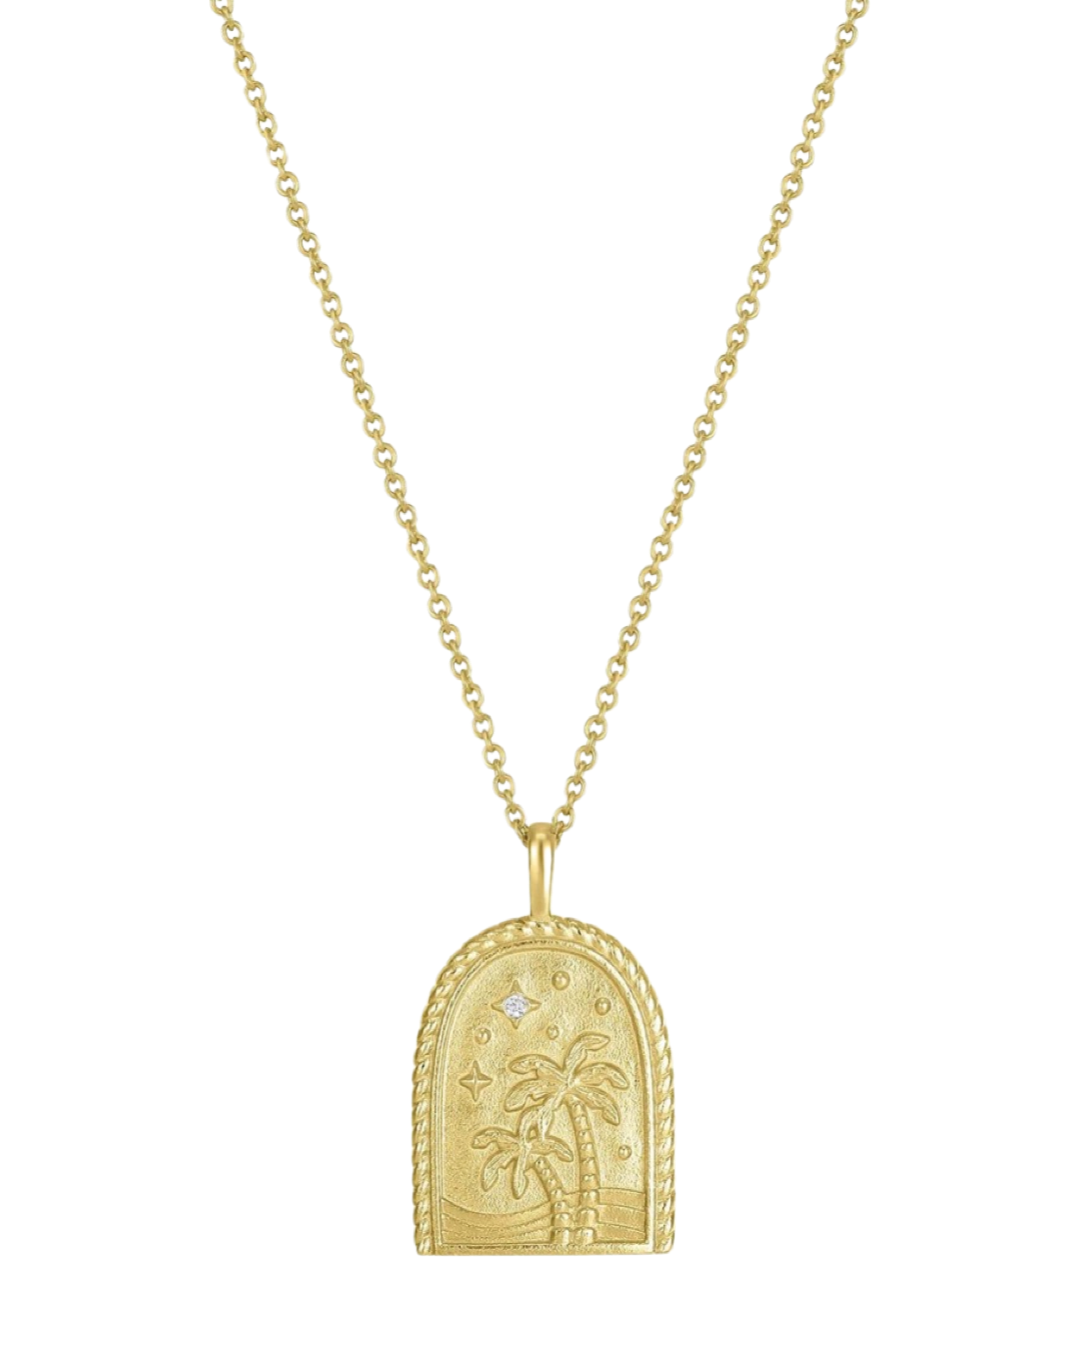 Palm Tree Pendant Necklace in Gold